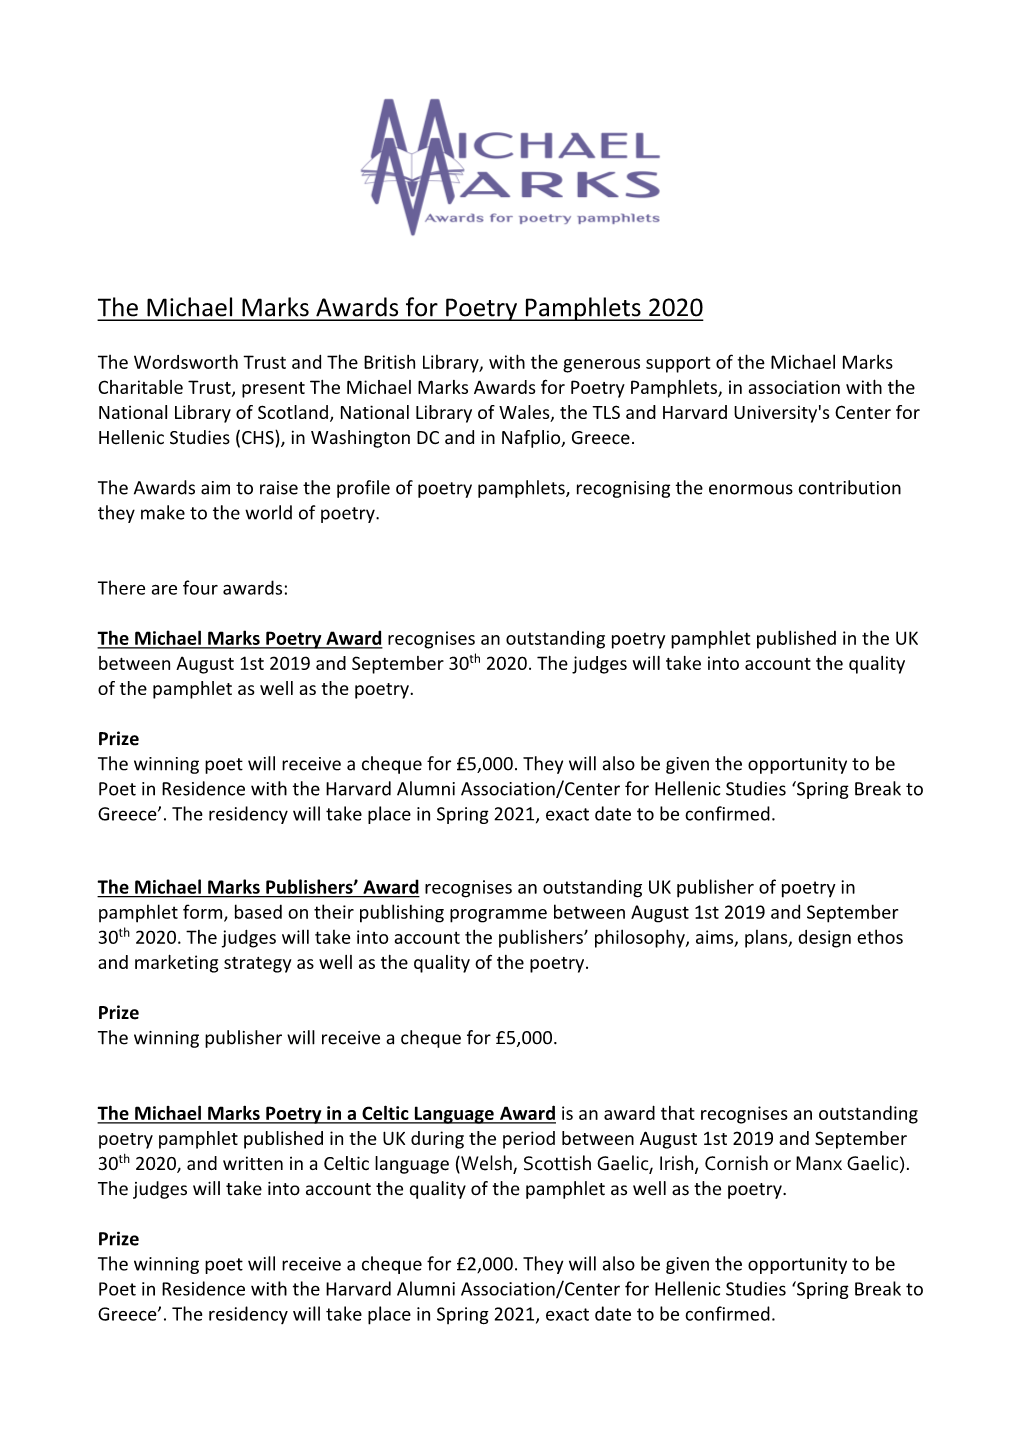 The Michael Marks Awards for Poetry Pamphlets 2020